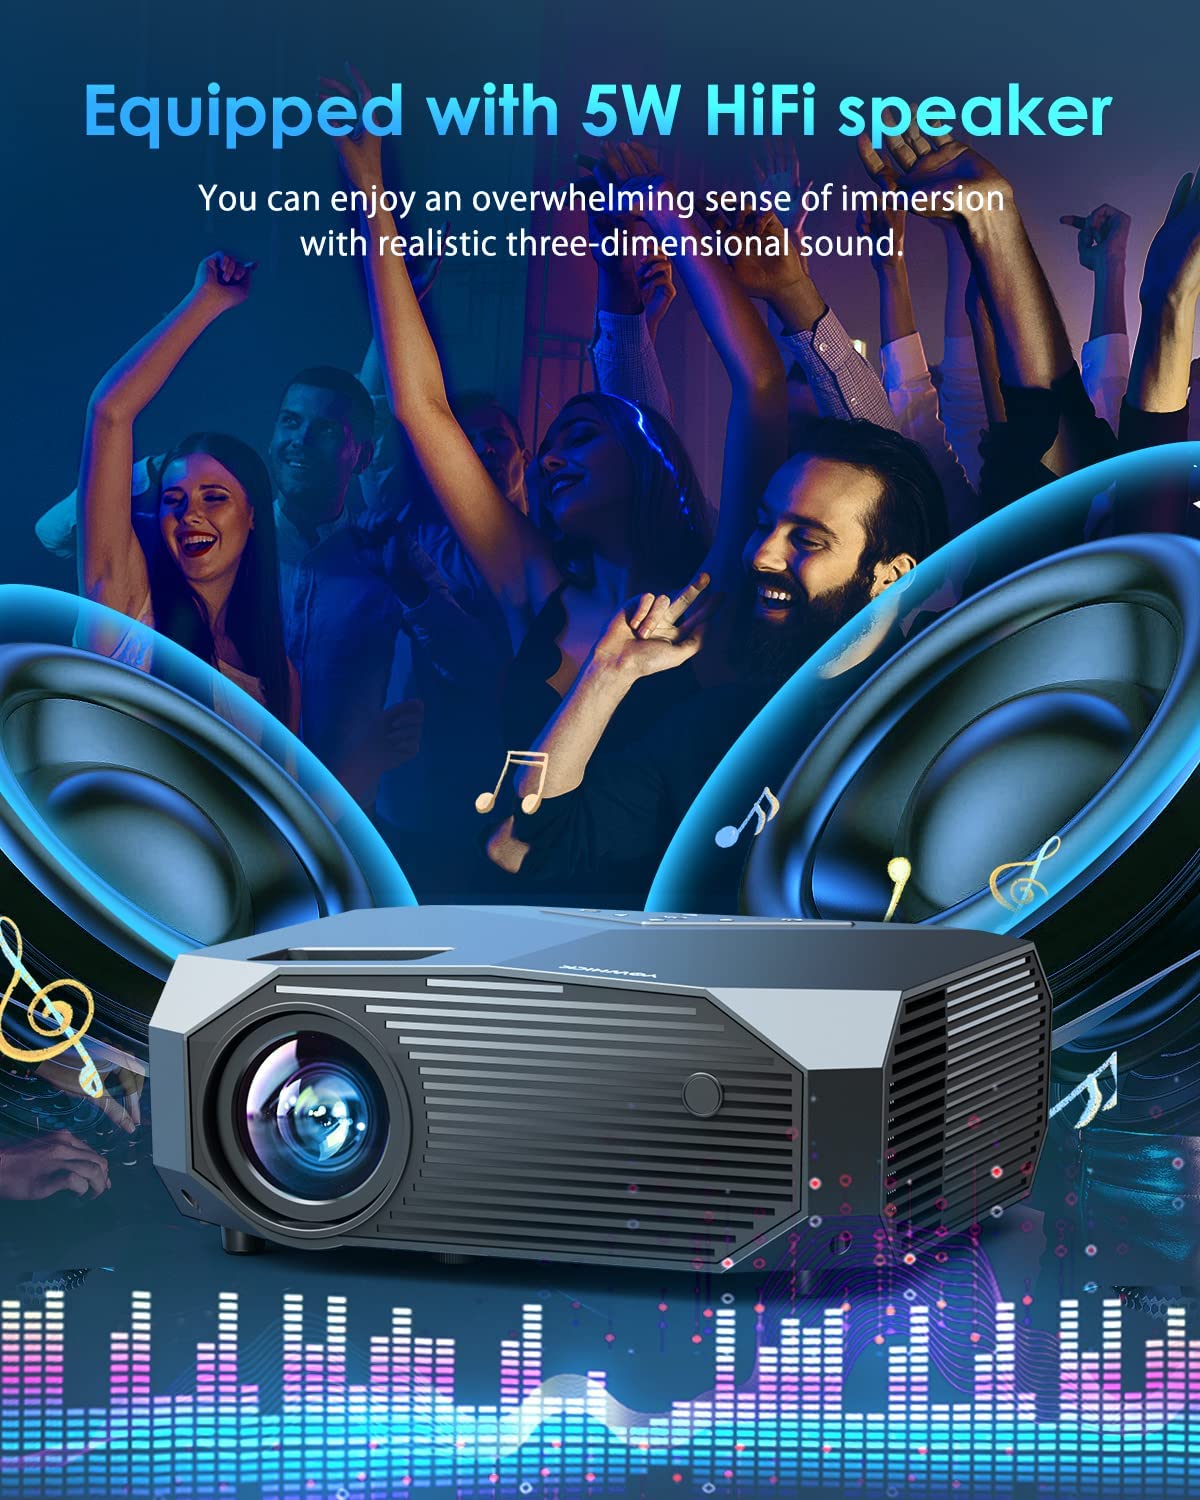 YOWHICK 5G WiFi Projector 10000L Full HD 1080P Outdoor Portable Video Projector Support 4K, Home Theater Movie Projector Compatible with HDMI, VGA, USB - Black - YOWHICK